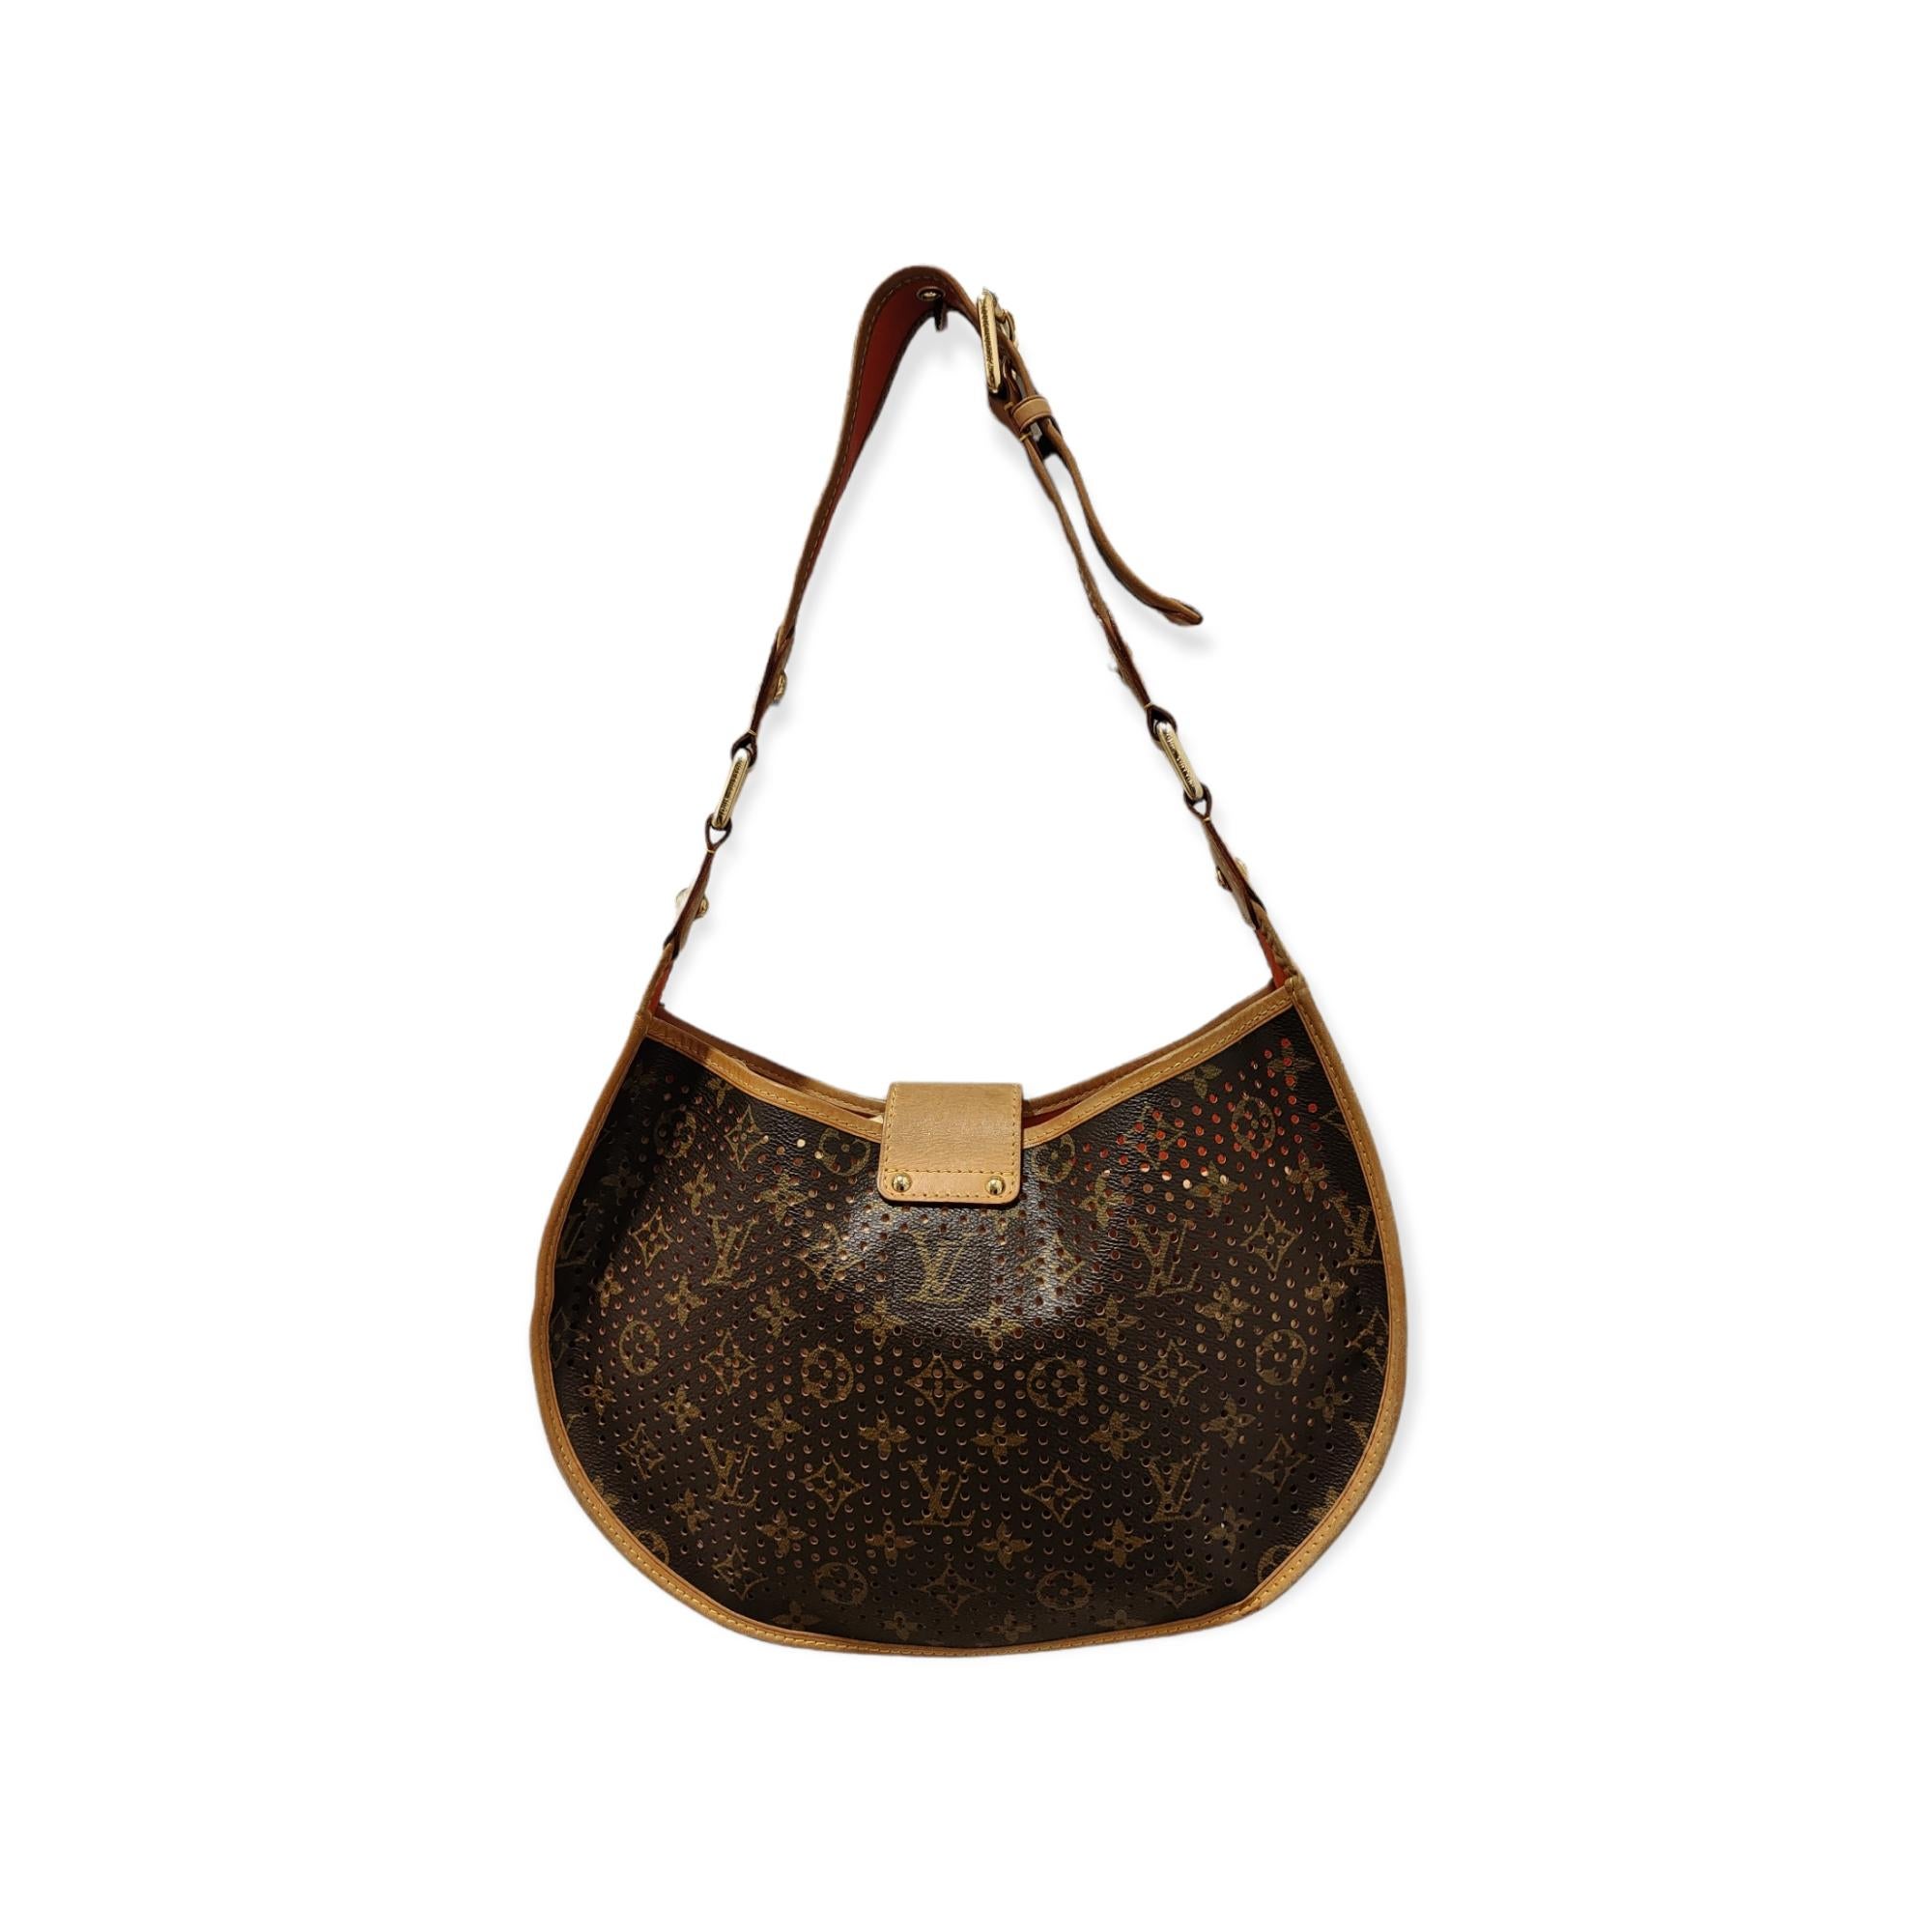 Women's or Men's Louis Vuitton perforated monogram and orange leather shoulder bag